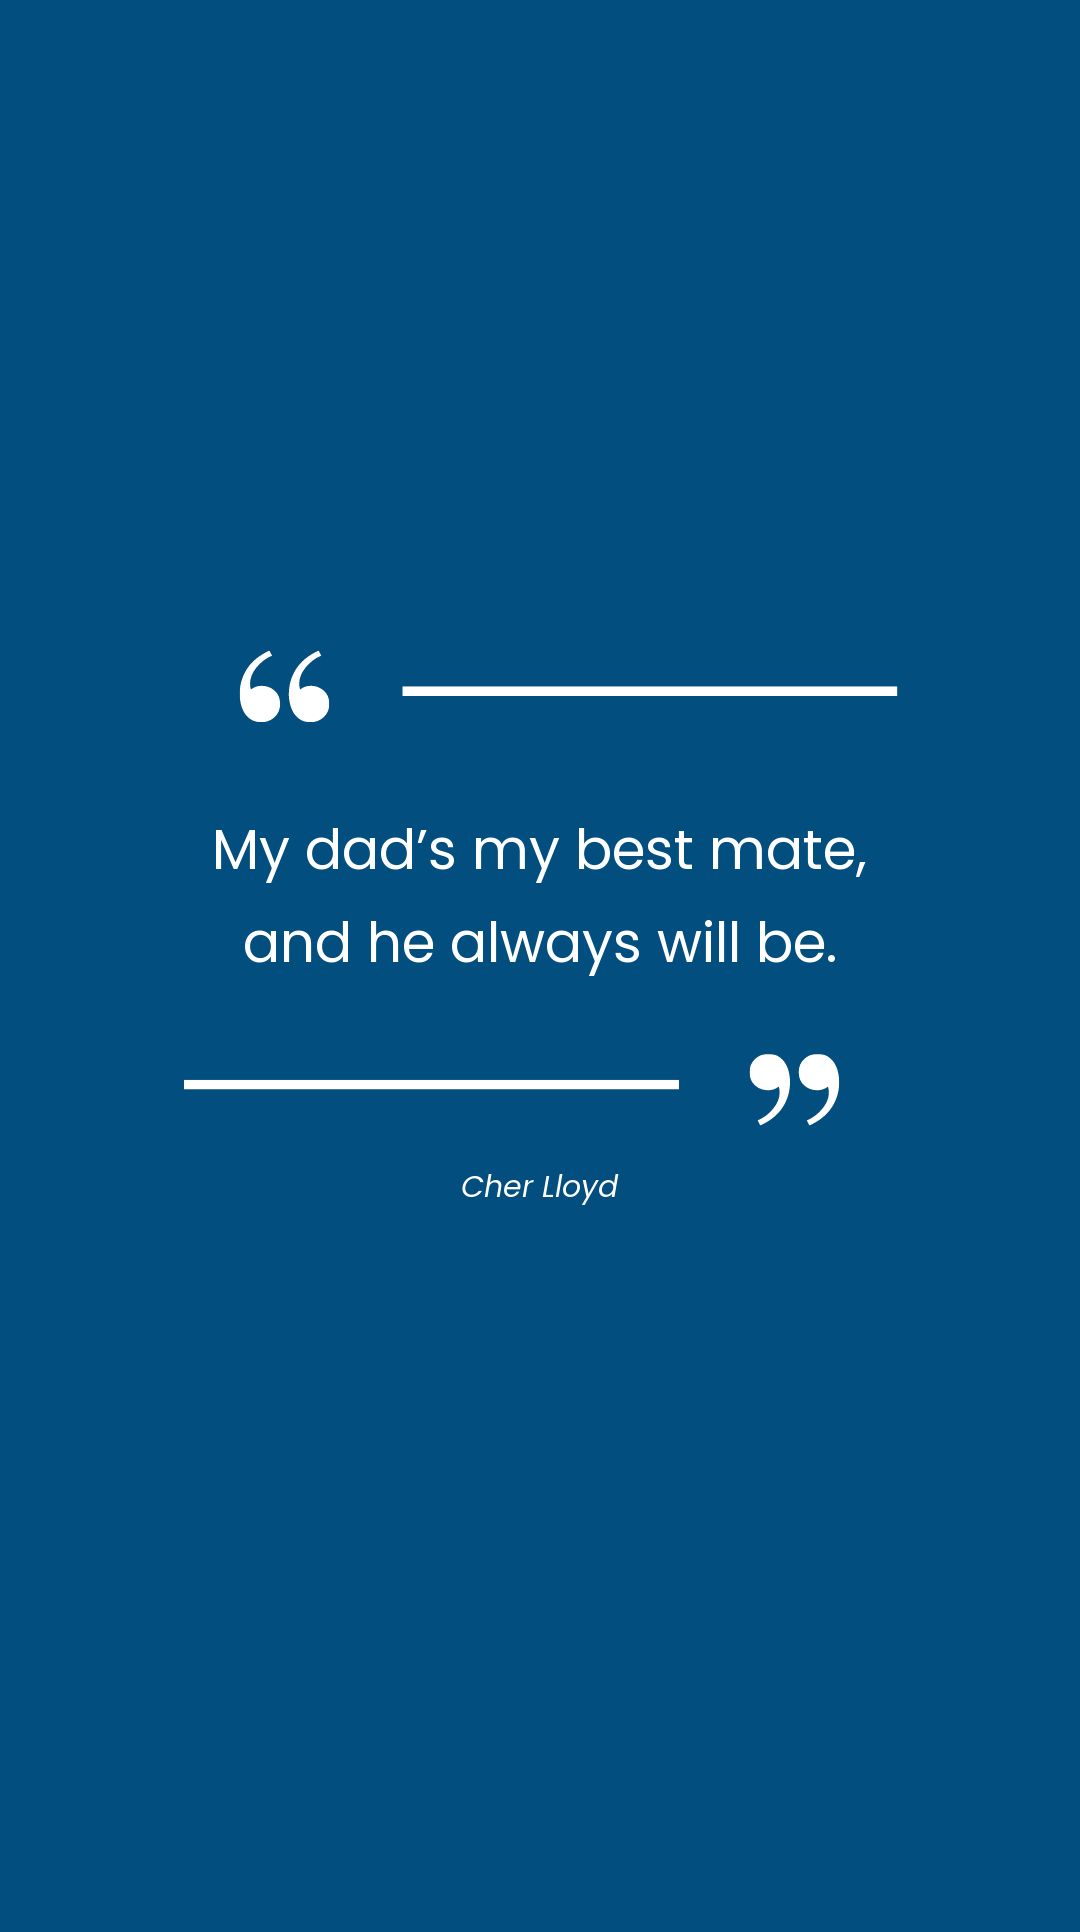 Cher Lloyd - My dad’s my best mate, and he always will be.